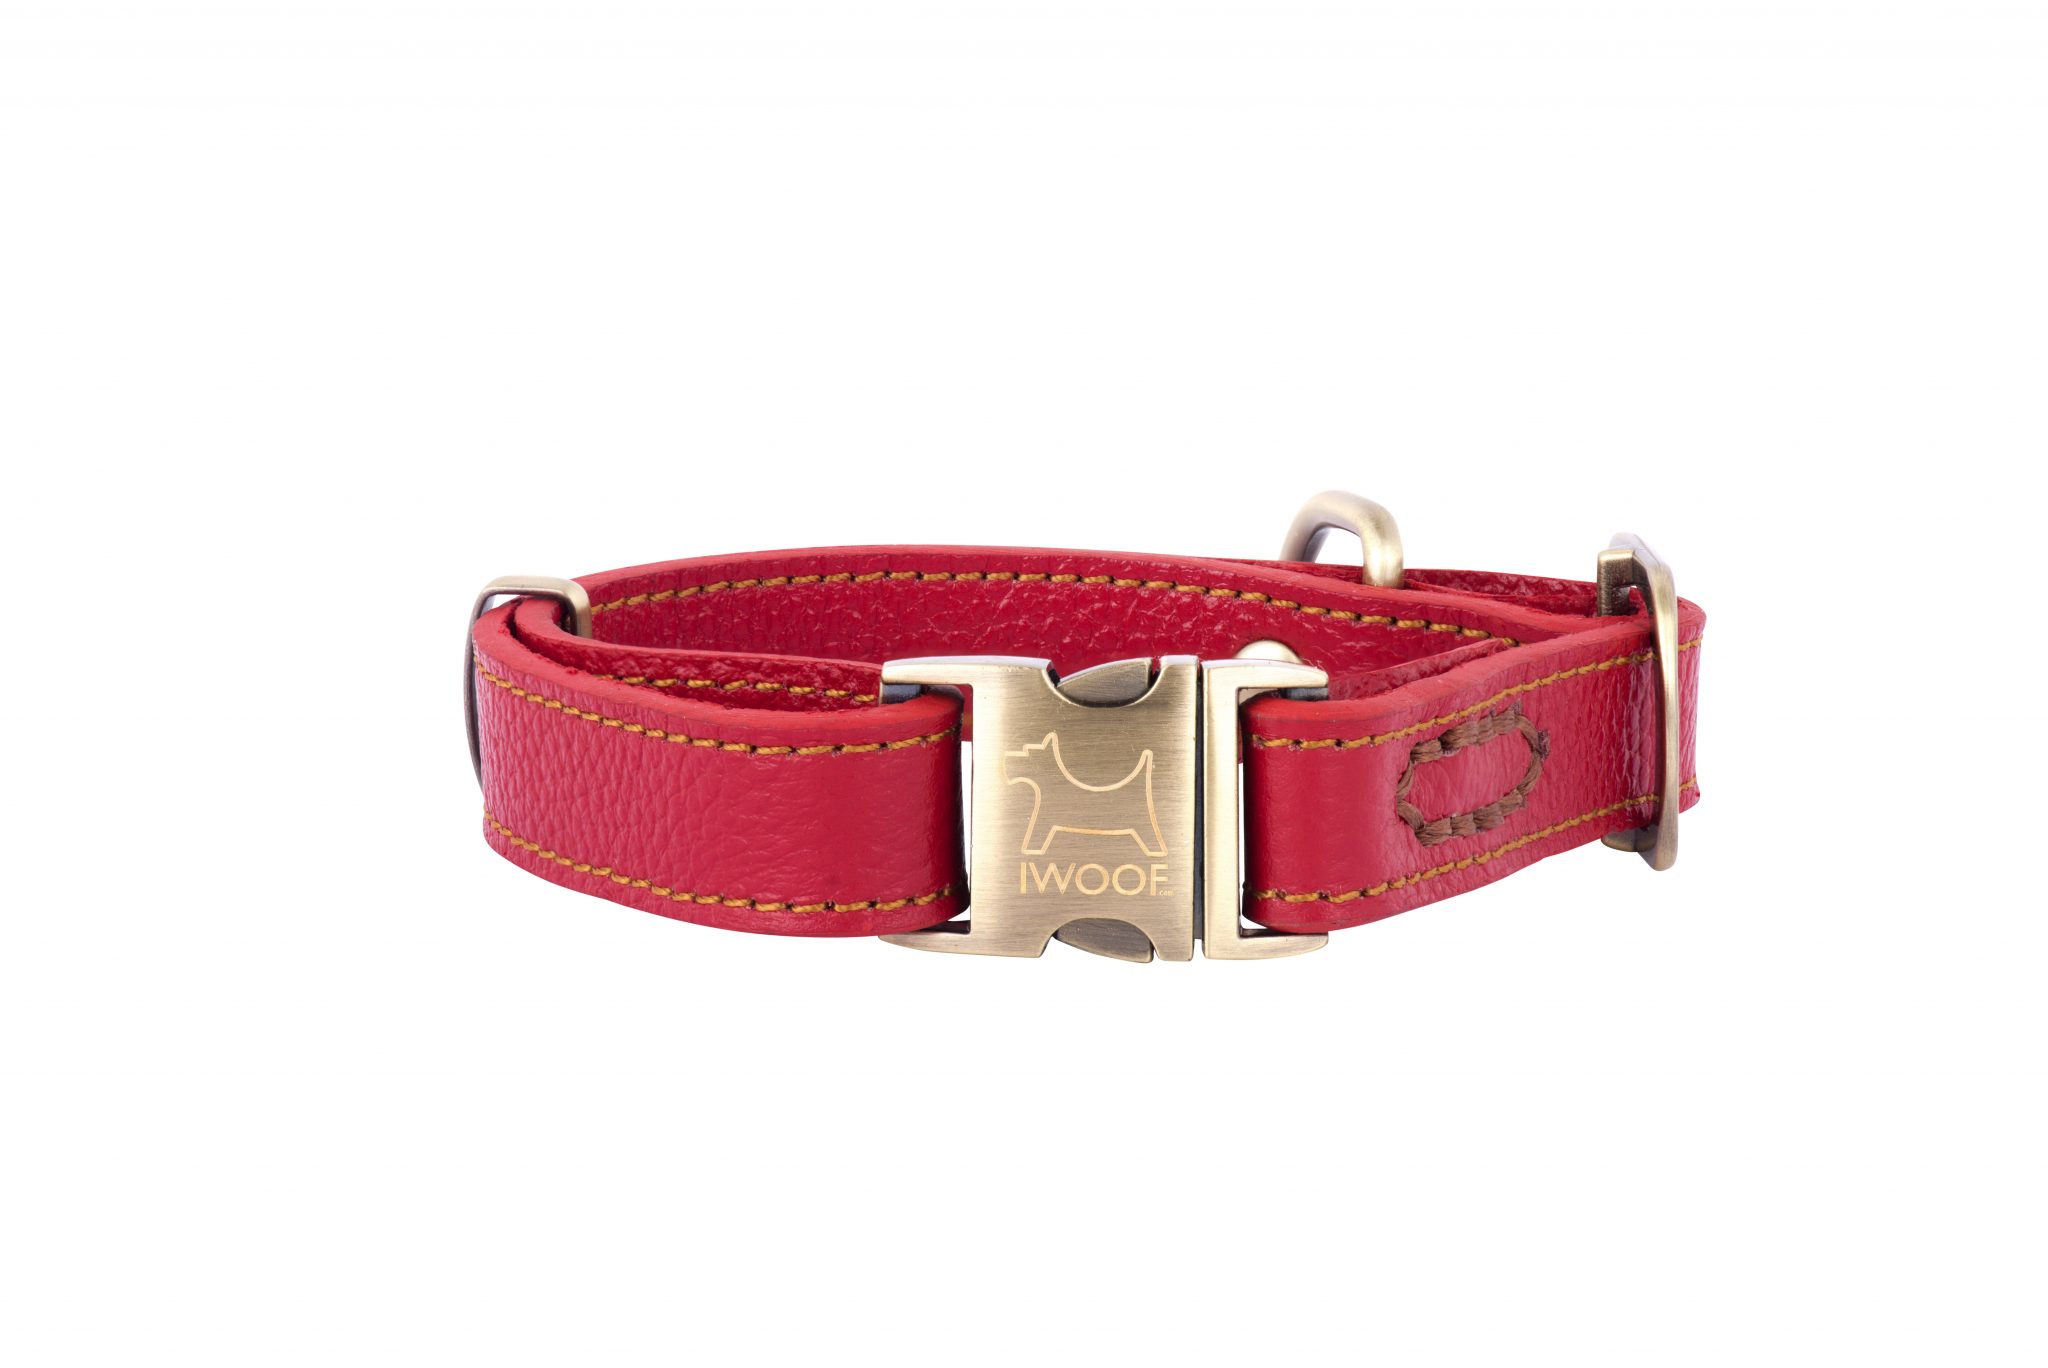 POLZEATH leather designer dog collar in red by IWOOF